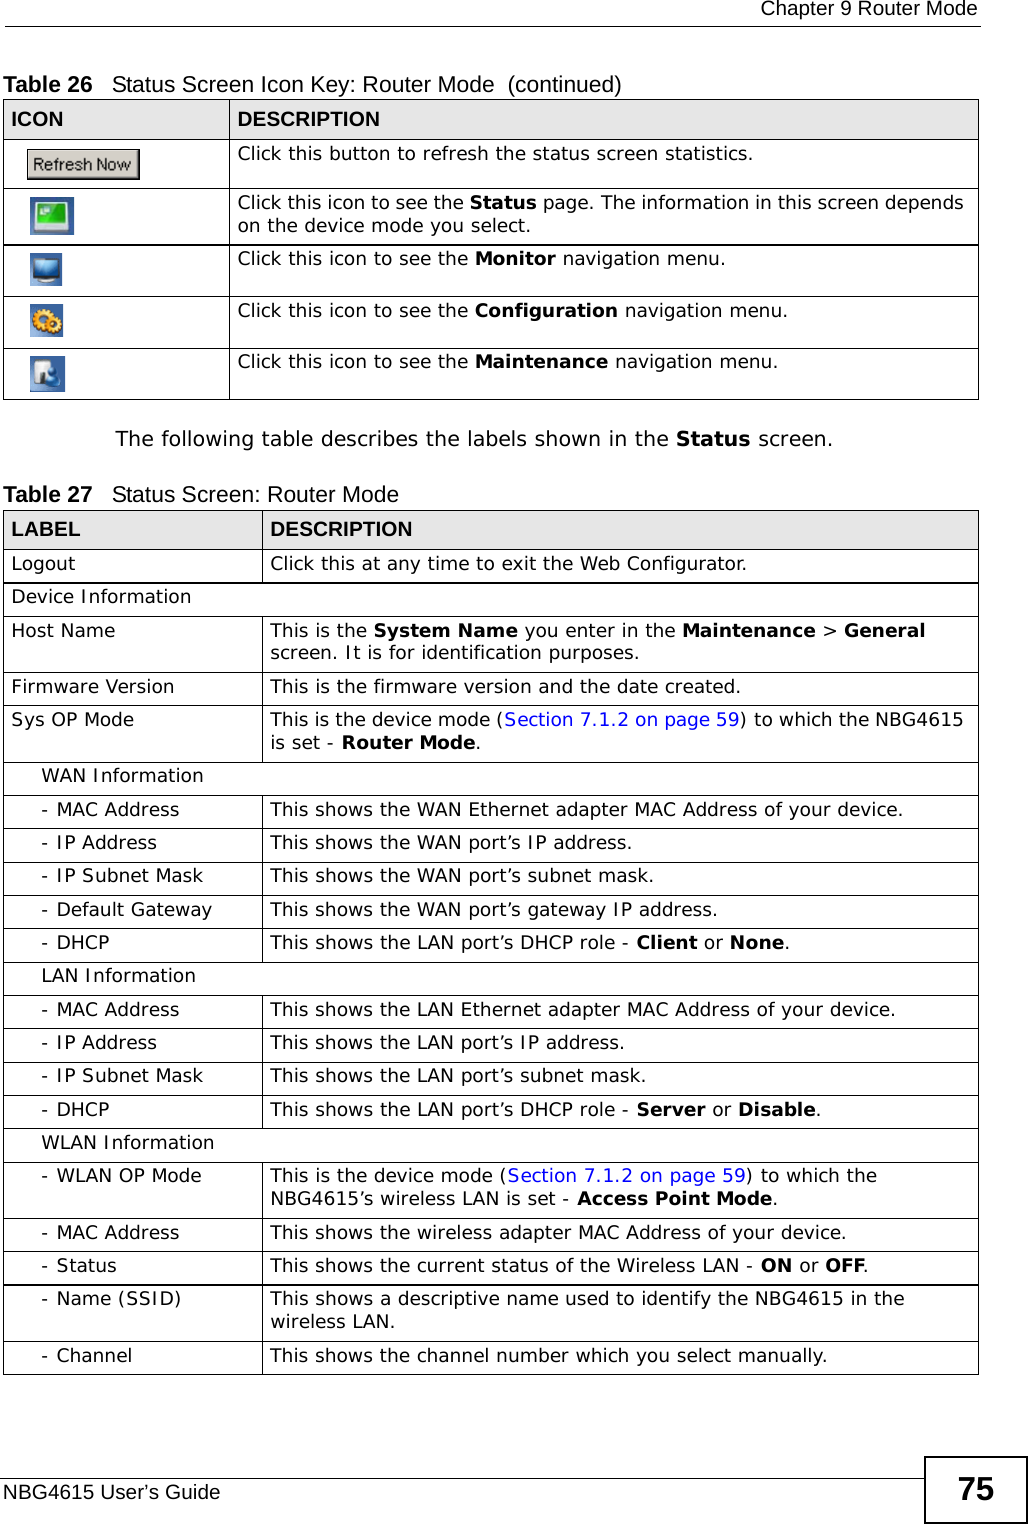  Chapter 9 Router ModeNBG4615 User’s Guide 75The following table describes the labels shown in the Status screen.Click this button to refresh the status screen statistics.Click this icon to see the Status page. The information in this screen depends on the device mode you select. Click this icon to see the Monitor navigation menu. Click this icon to see the Configuration navigation menu. Click this icon to see the Maintenance navigation menu. Table 26   Status Screen Icon Key: Router Mode  (continued)ICON DESCRIPTIONTable 27   Status Screen: Router Mode  LABEL DESCRIPTIONLogout Click this at any time to exit the Web Configurator.Device InformationHost Name This is the System Name you enter in the Maintenance &gt; General screen. It is for identification purposes.Firmware Version This is the firmware version and the date created. Sys OP Mode This is the device mode (Section 7.1.2 on page 59) to which the NBG4615 is set - Router Mode.WAN Information- MAC Address This shows the WAN Ethernet adapter MAC Address of your device.- IP Address This shows the WAN port’s IP address.- IP Subnet Mask This shows the WAN port’s subnet mask.- Default Gateway This shows the WAN port’s gateway IP address.- DHCP This shows the LAN port’s DHCP role - Client or None.LAN Information- MAC Address This shows the LAN Ethernet adapter MAC Address of your device.- IP Address This shows the LAN port’s IP address.- IP Subnet Mask This shows the LAN port’s subnet mask.- DHCP This shows the LAN port’s DHCP role - Server or Disable.WLAN Information- WLAN OP Mode This is the device mode (Section 7.1.2 on page 59) to which the NBG4615’s wireless LAN is set - Access Point Mode.- MAC Address This shows the wireless adapter MAC Address of your device.- Status This shows the current status of the Wireless LAN - ON or OFF.- Name (SSID) This shows a descriptive name used to identify the NBG4615 in the wireless LAN. - Channel This shows the channel number which you select manually.